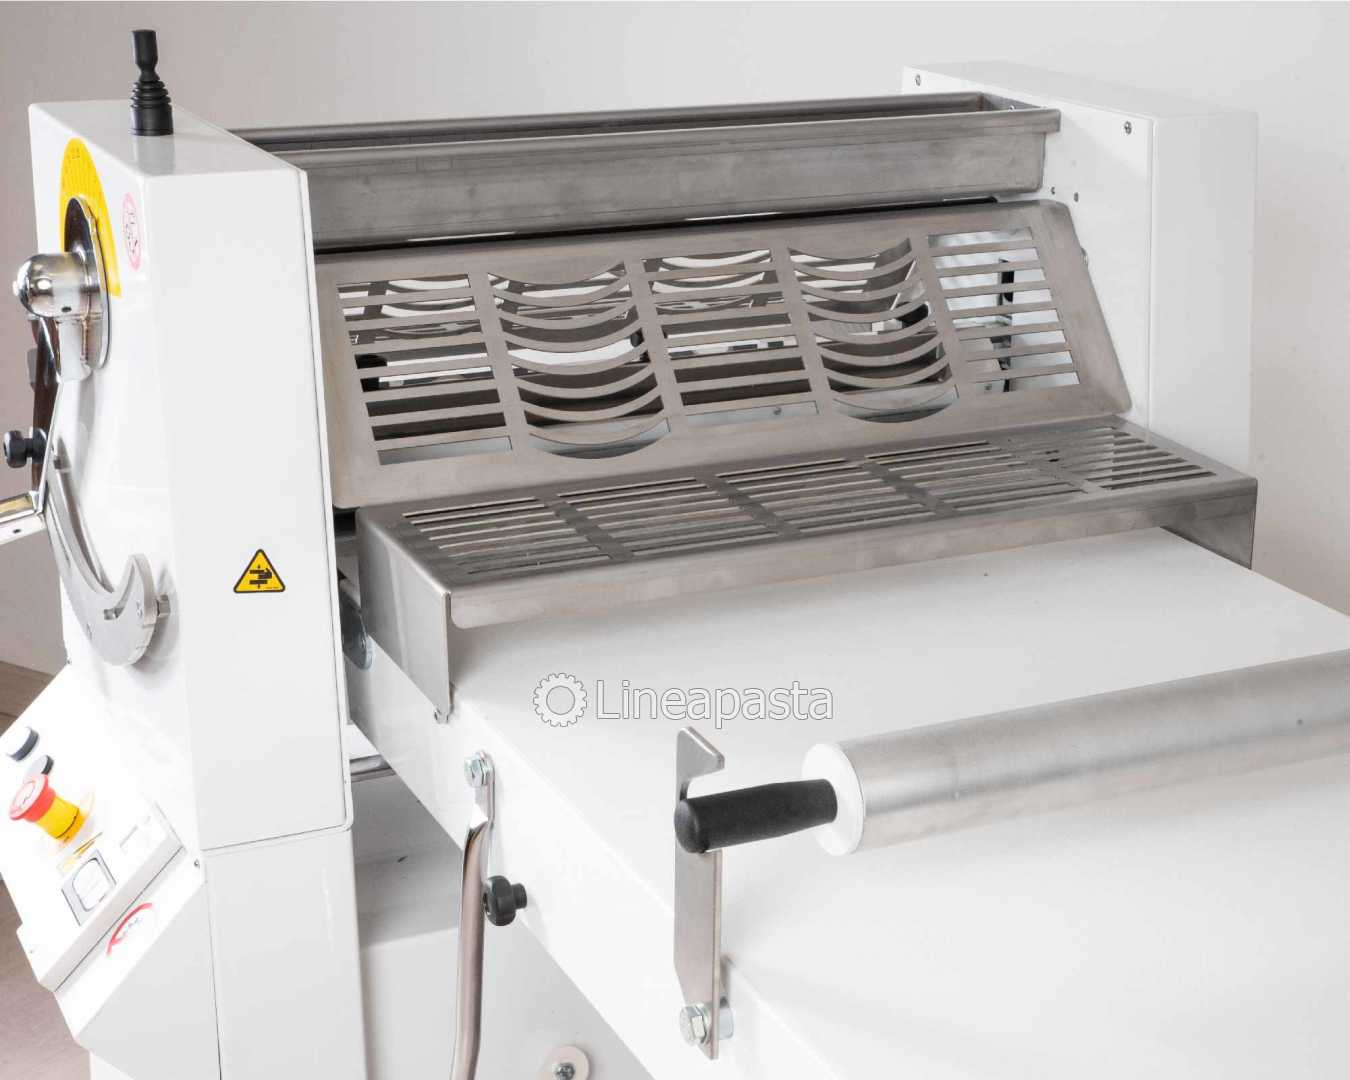 Pastry dough sheeter SE 600 with 600mm cylinders